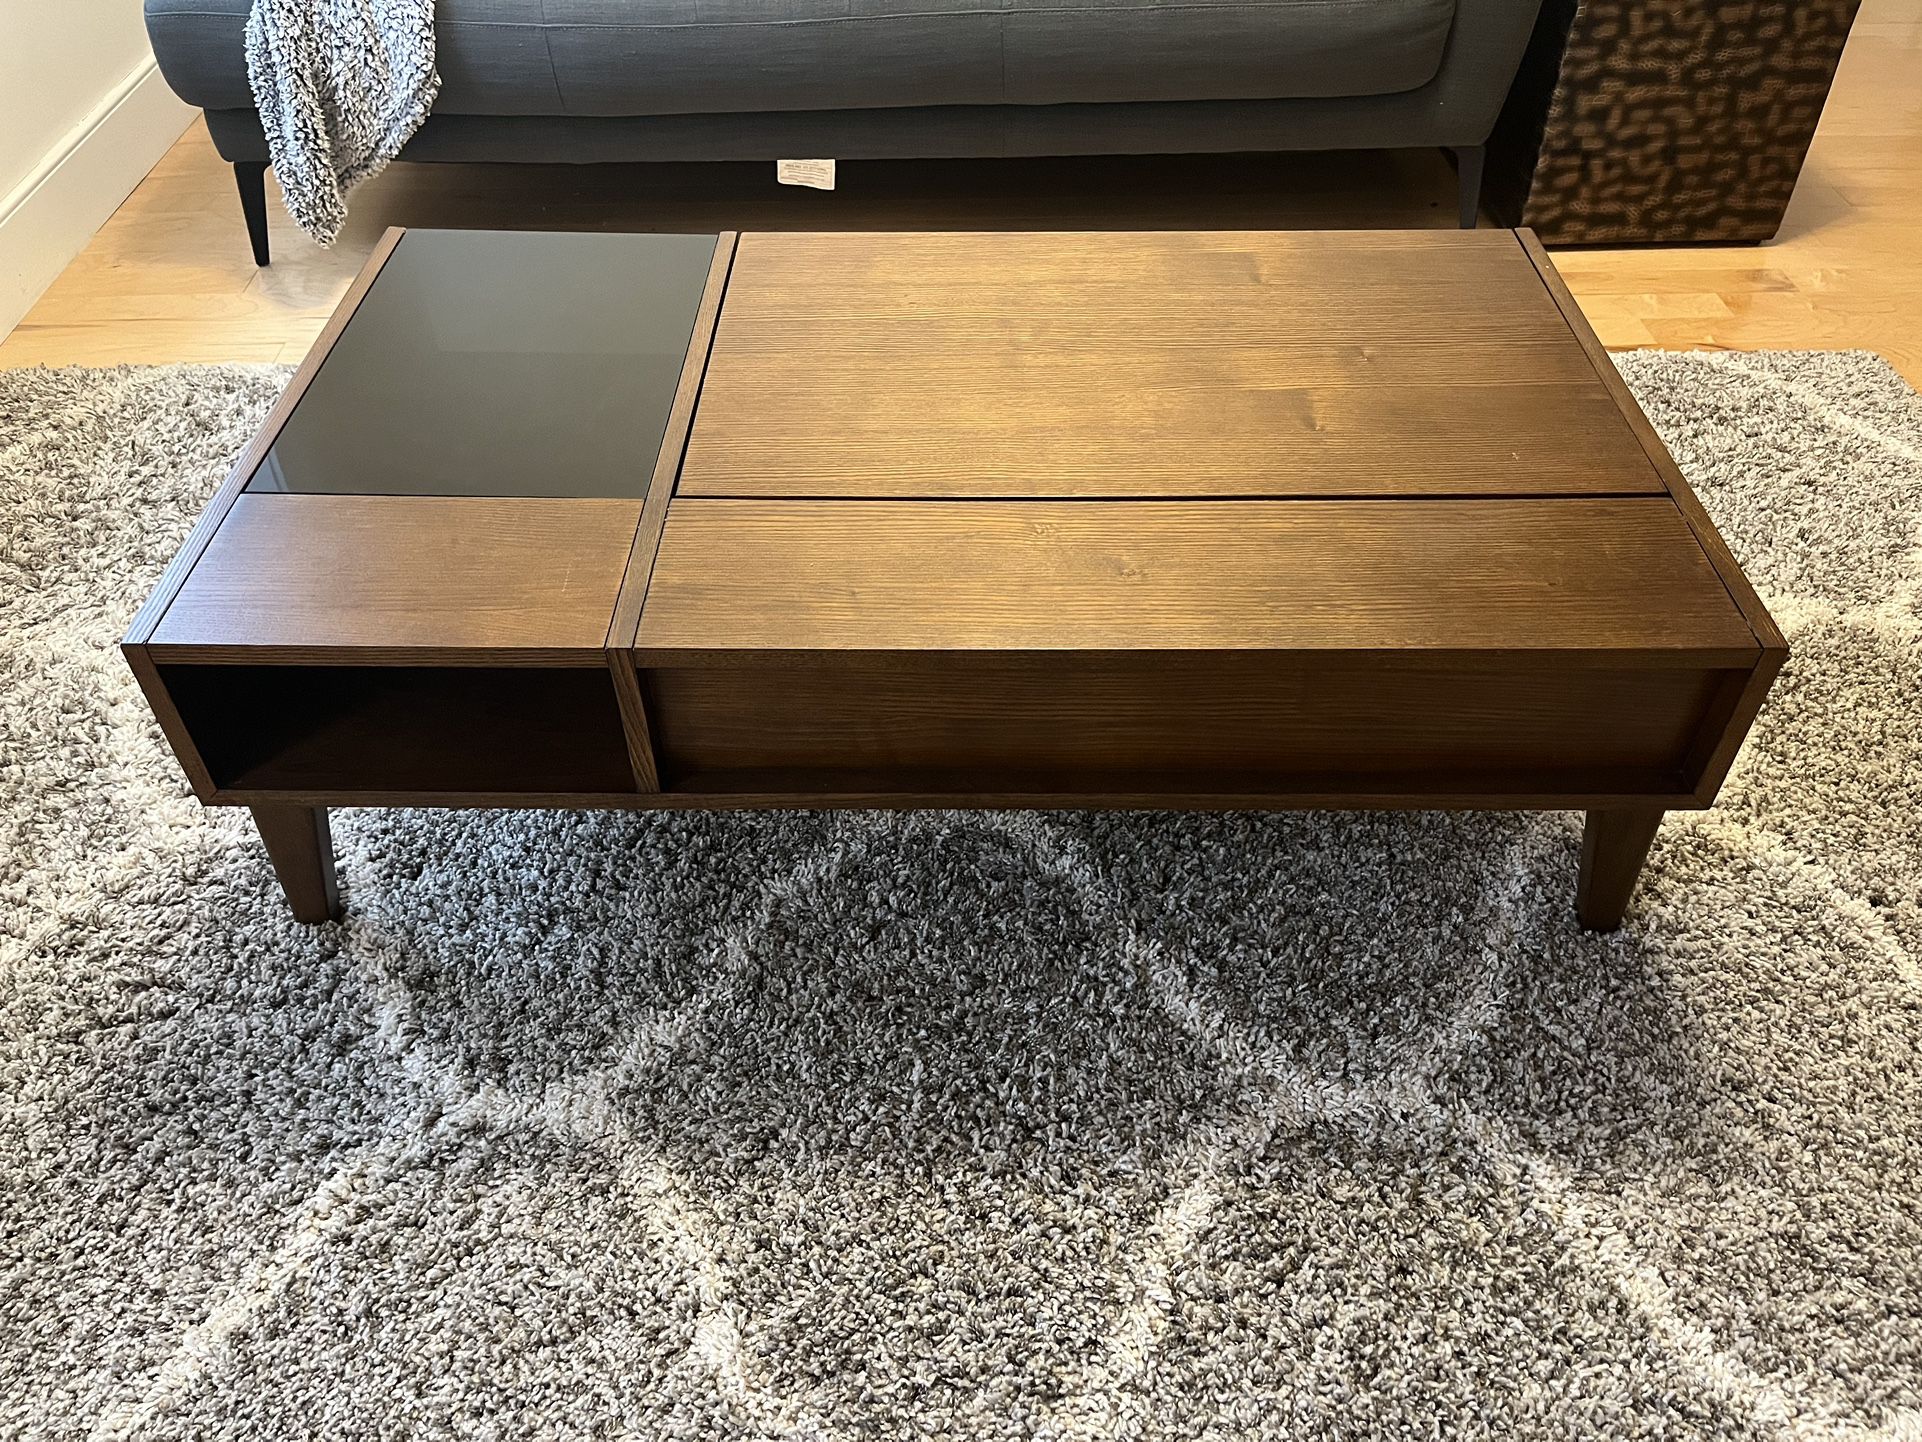 Midcentury Modern Coffee Table with Rising Tabletop